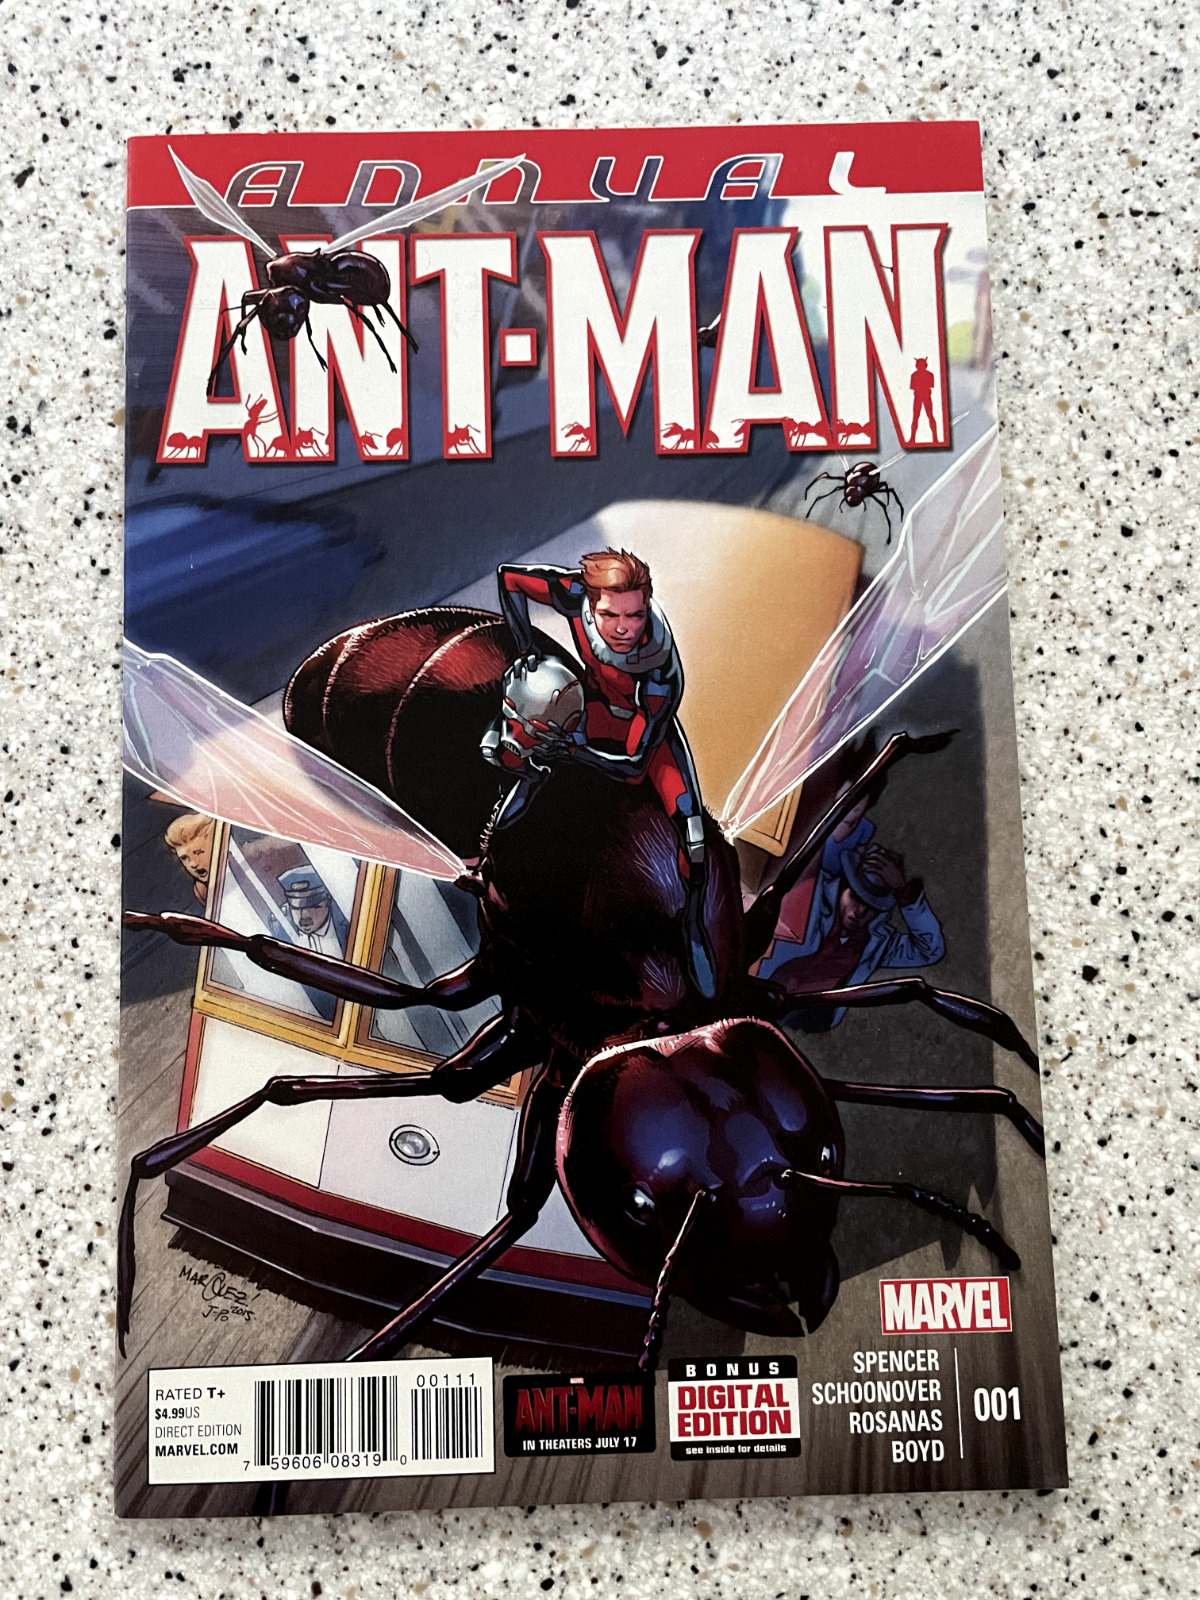 Ant-Man Annual #1 - Scott Lang and Hank Pym